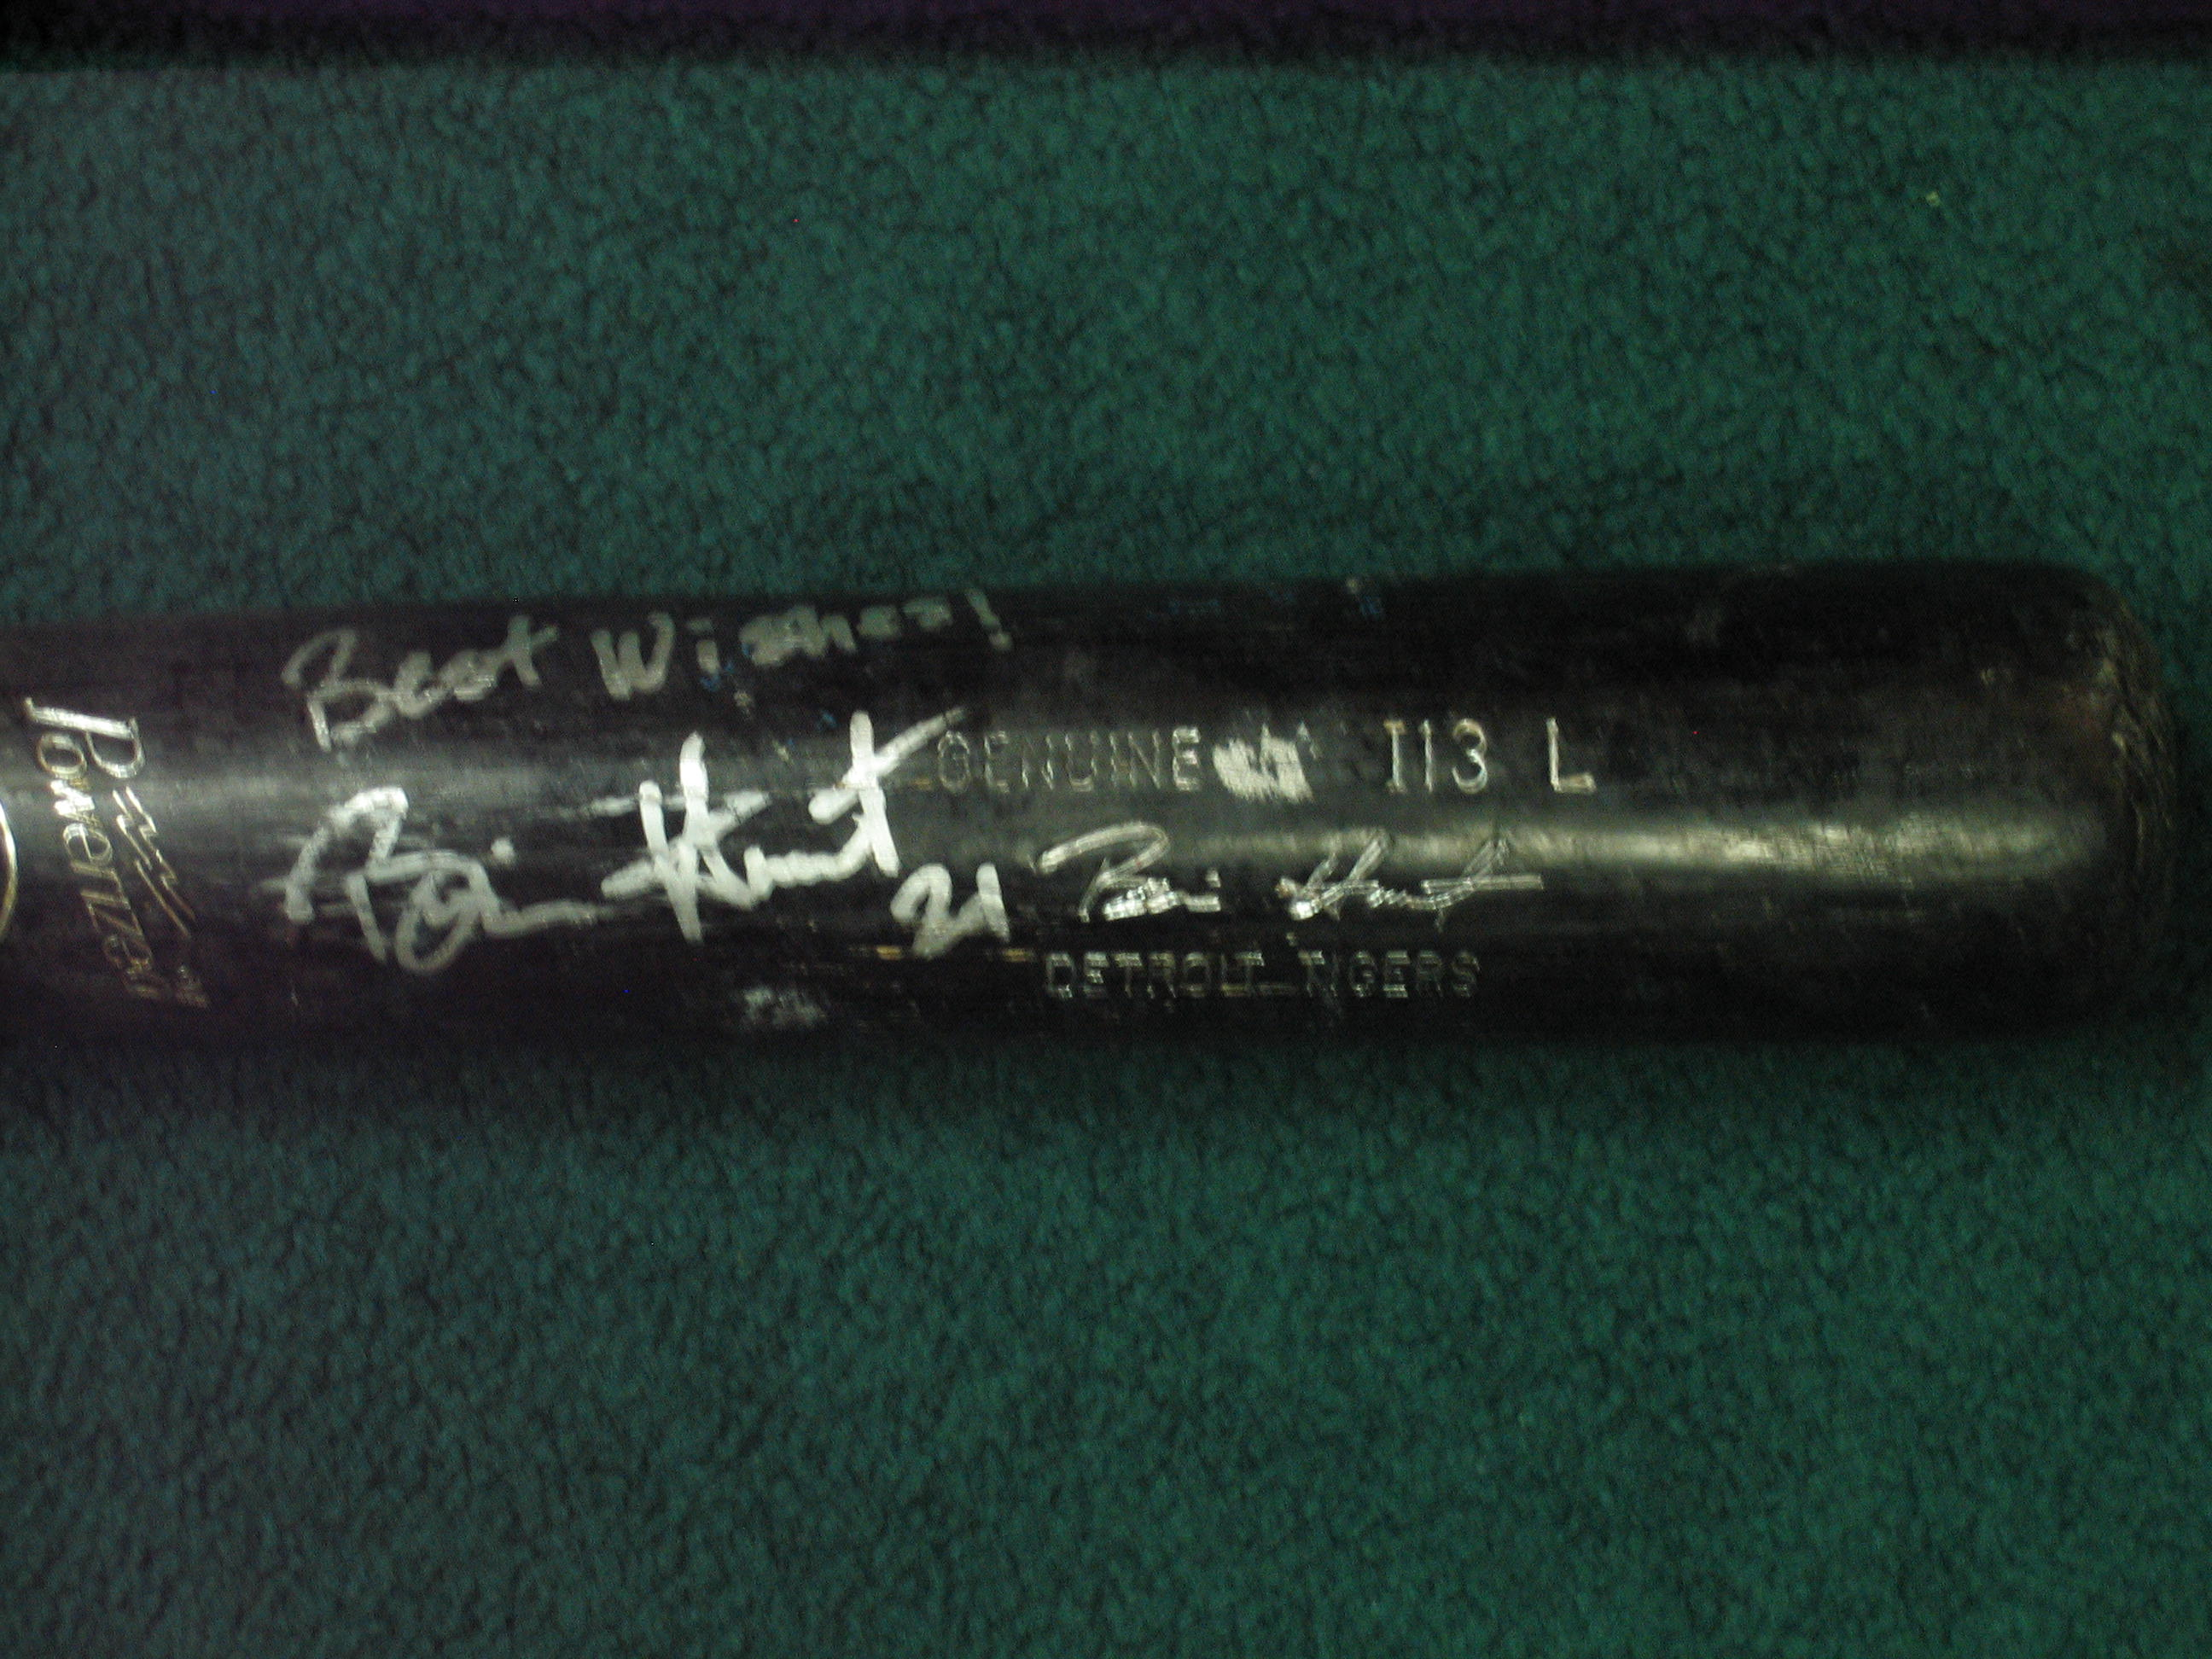 Game Used Bats